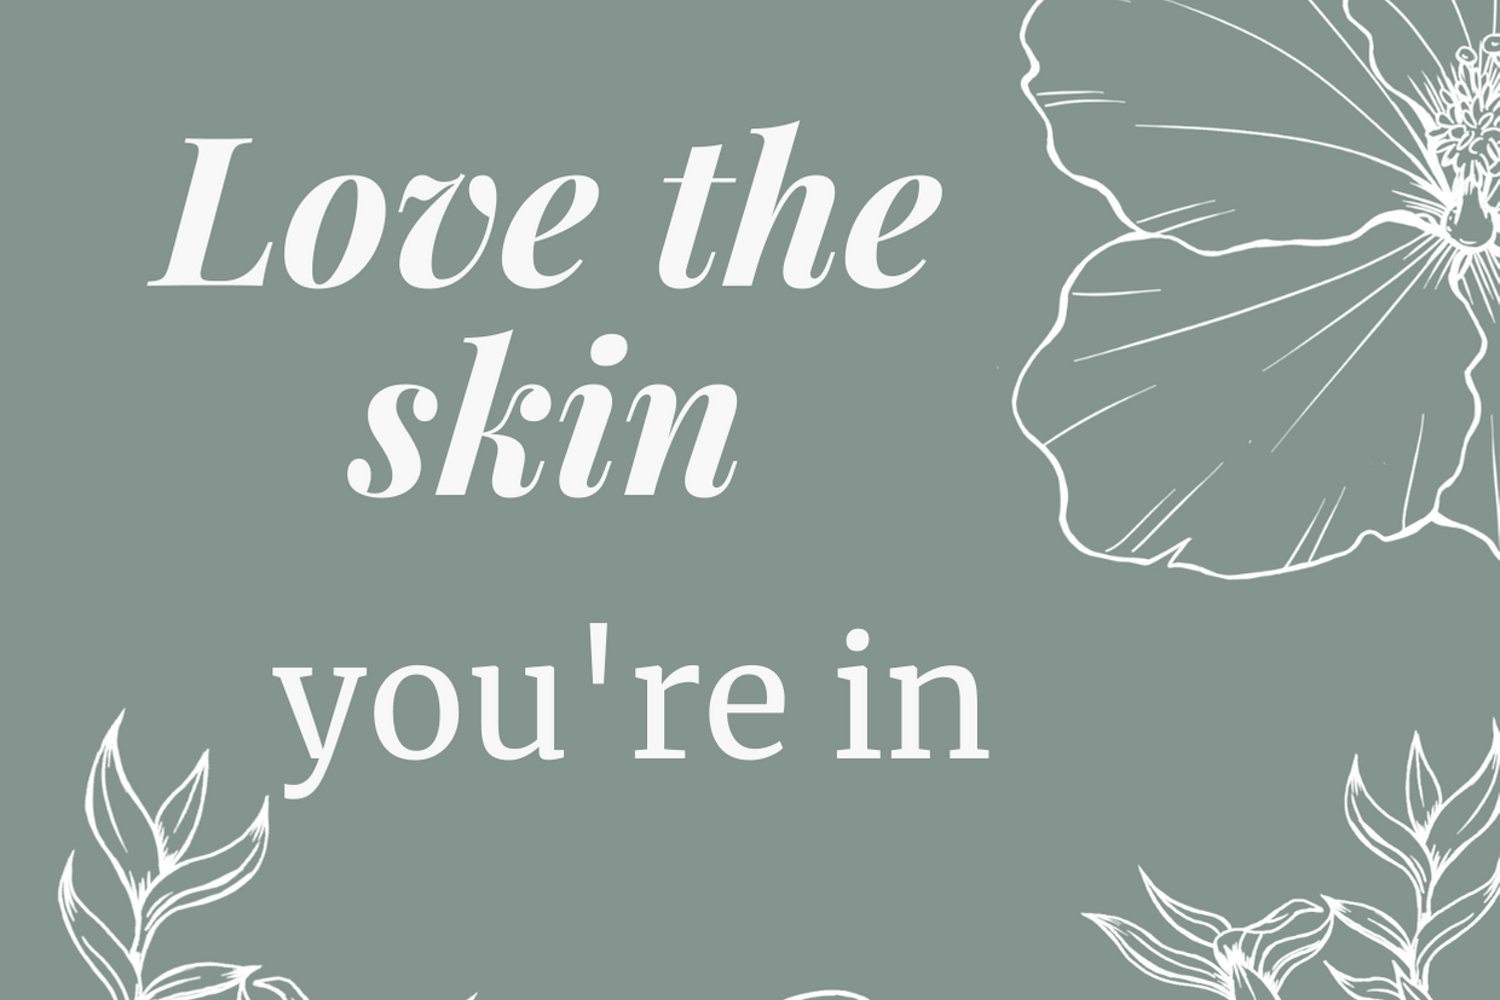 Love the skin you're in.